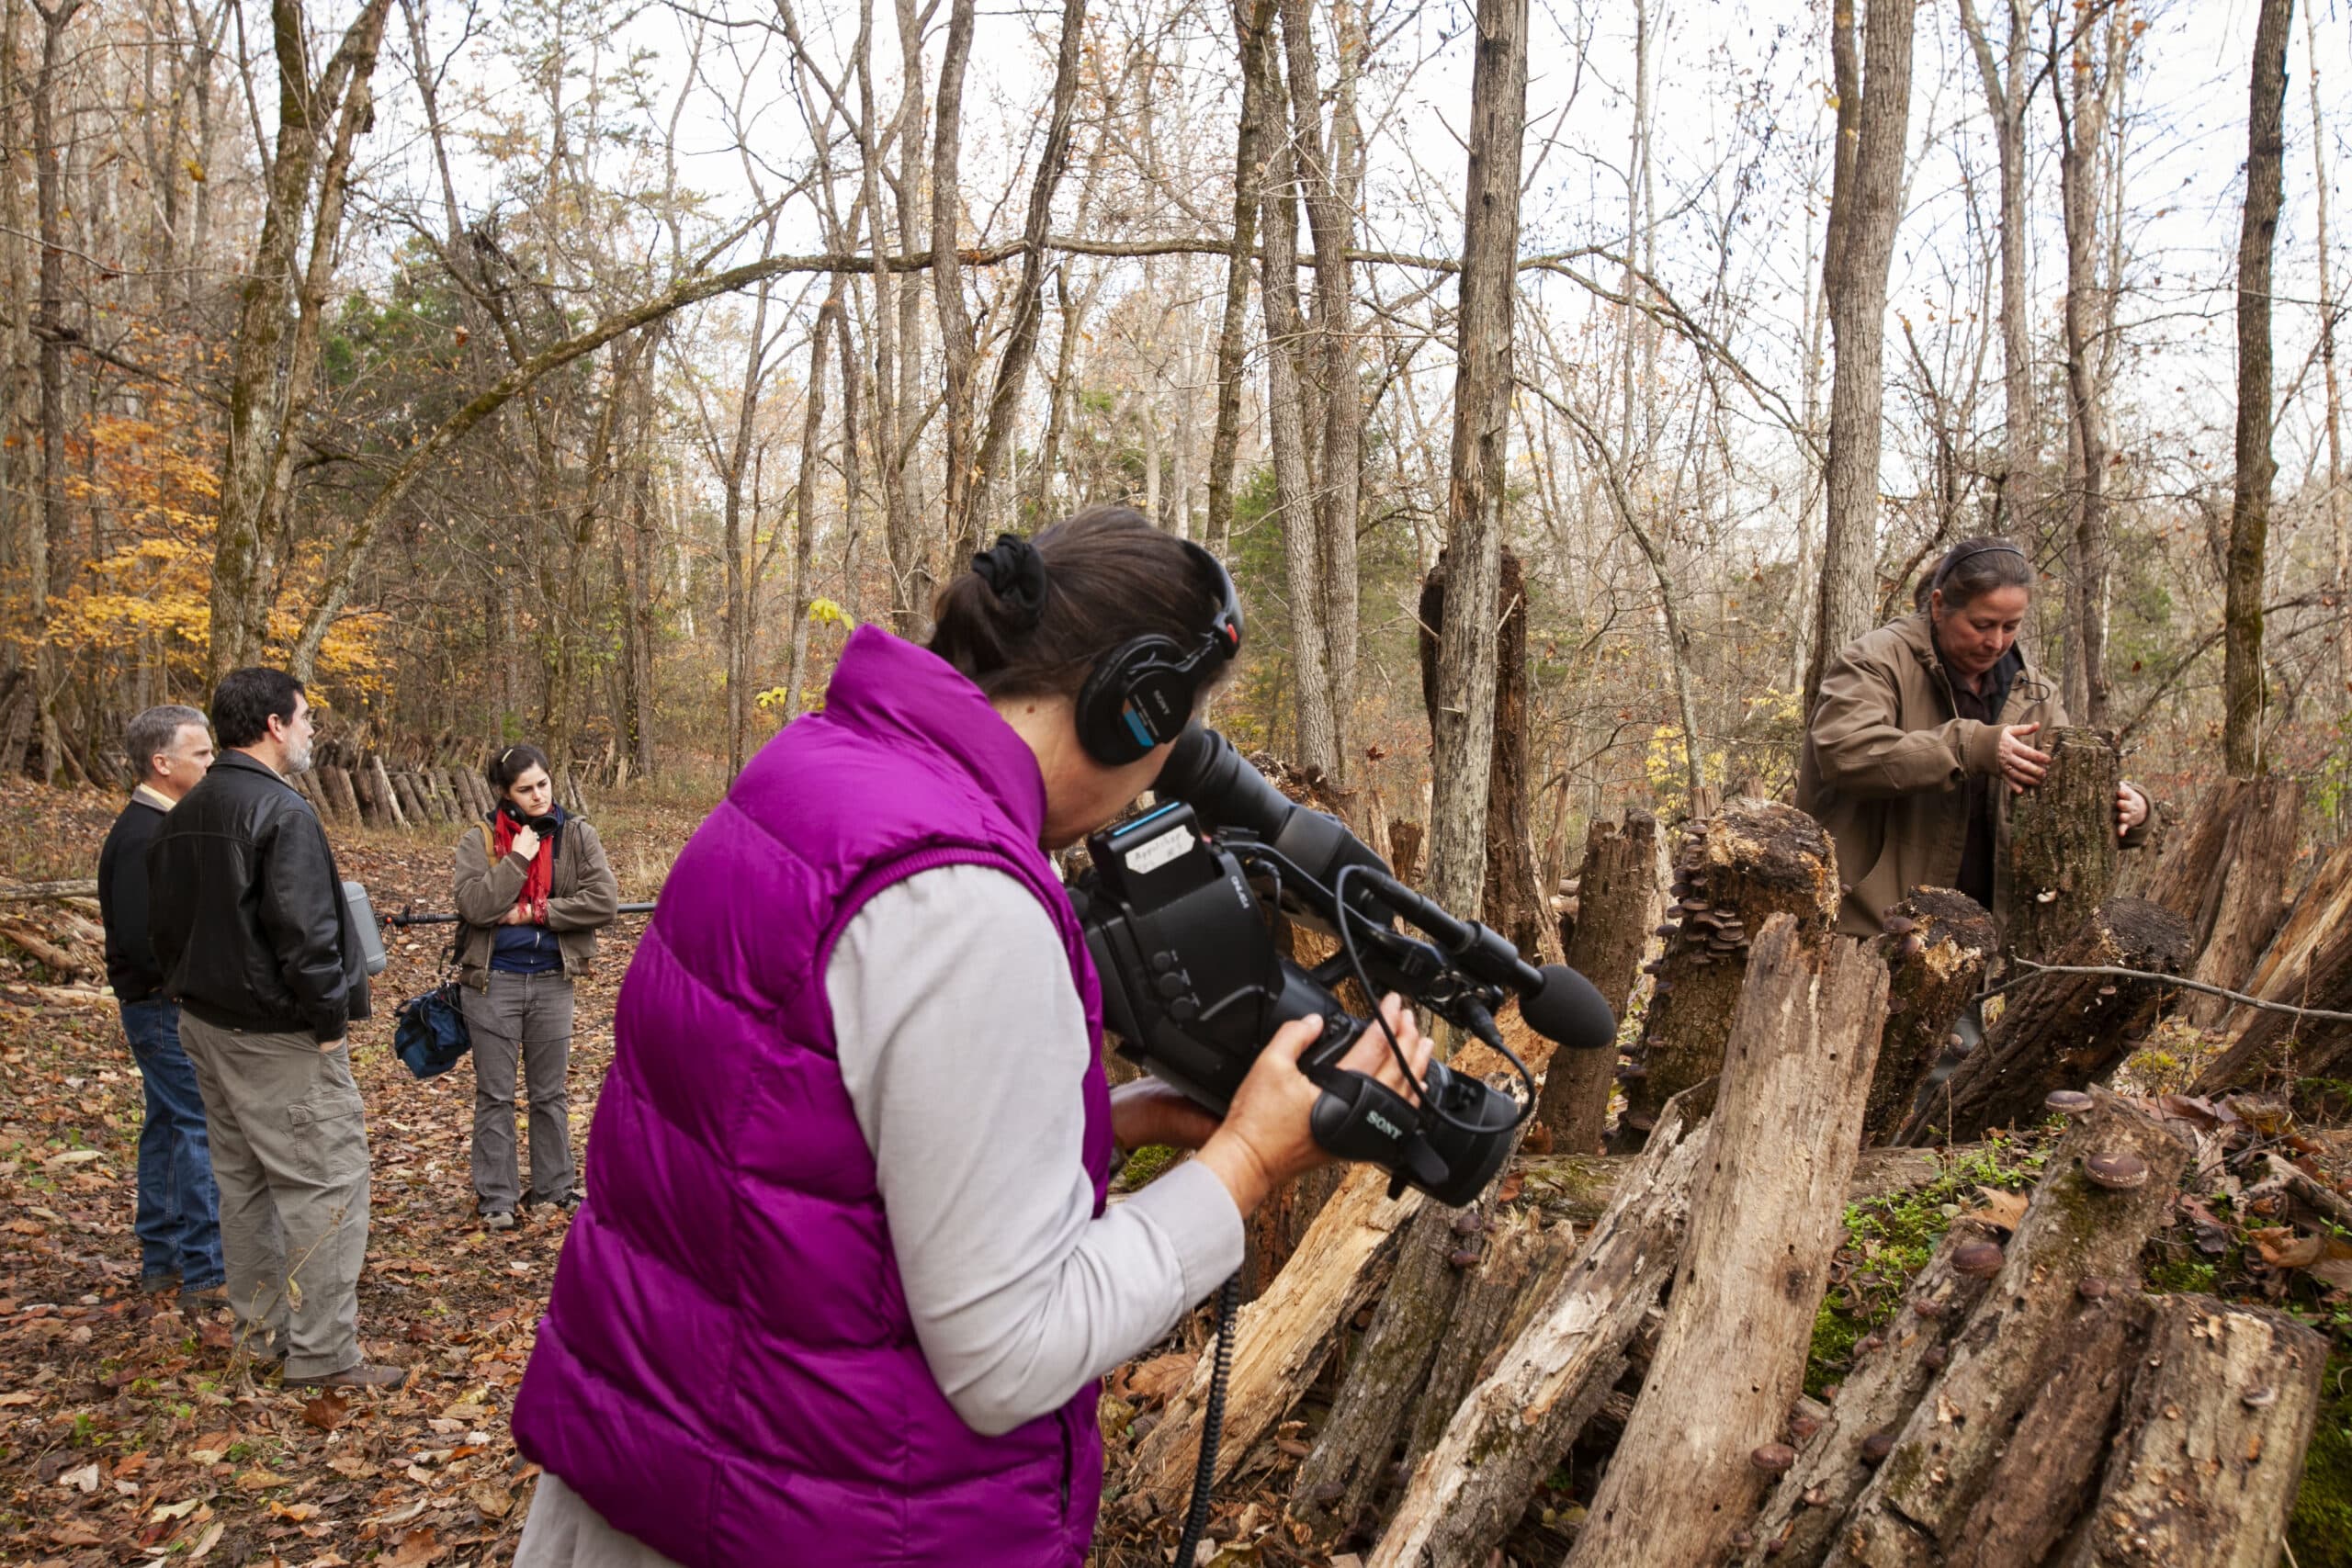 People stand in rural forest. Woman in pink vest has professional camera and records another woman and tree stumps.